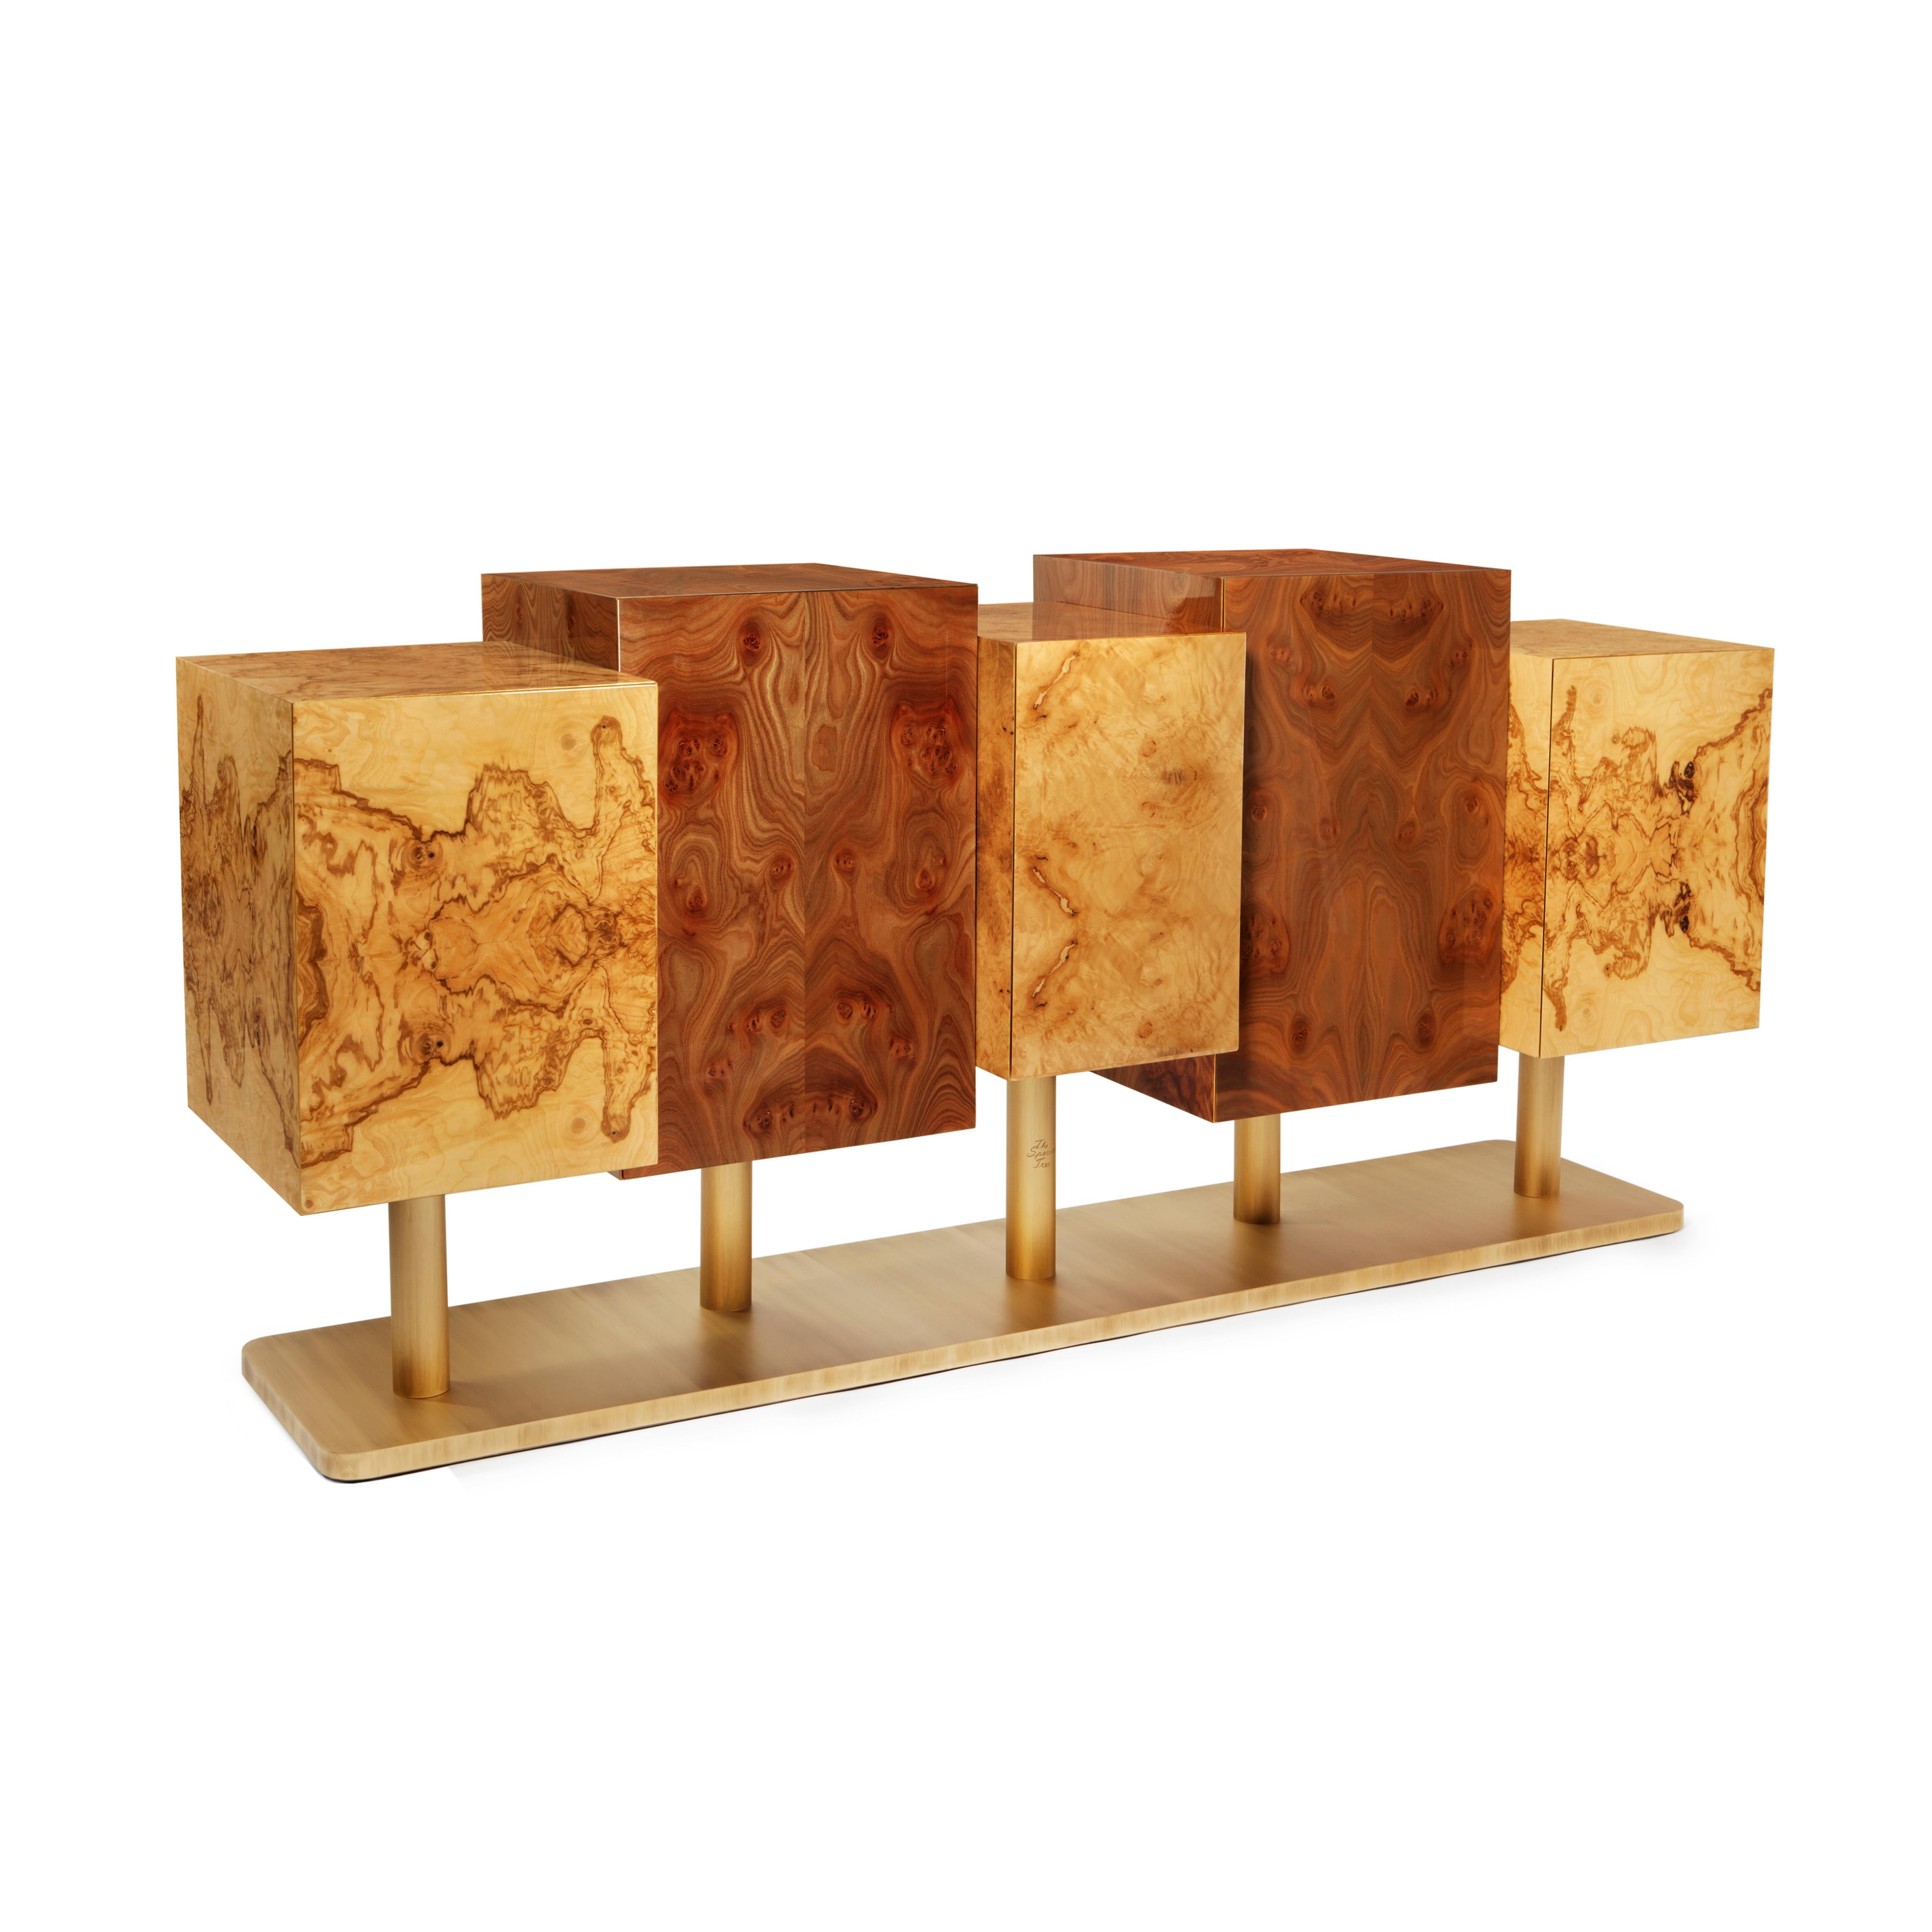 Modern The Special Tree Sideboard, Wood and Brass, InsidherLand by Joana Santos Barbosa For Sale